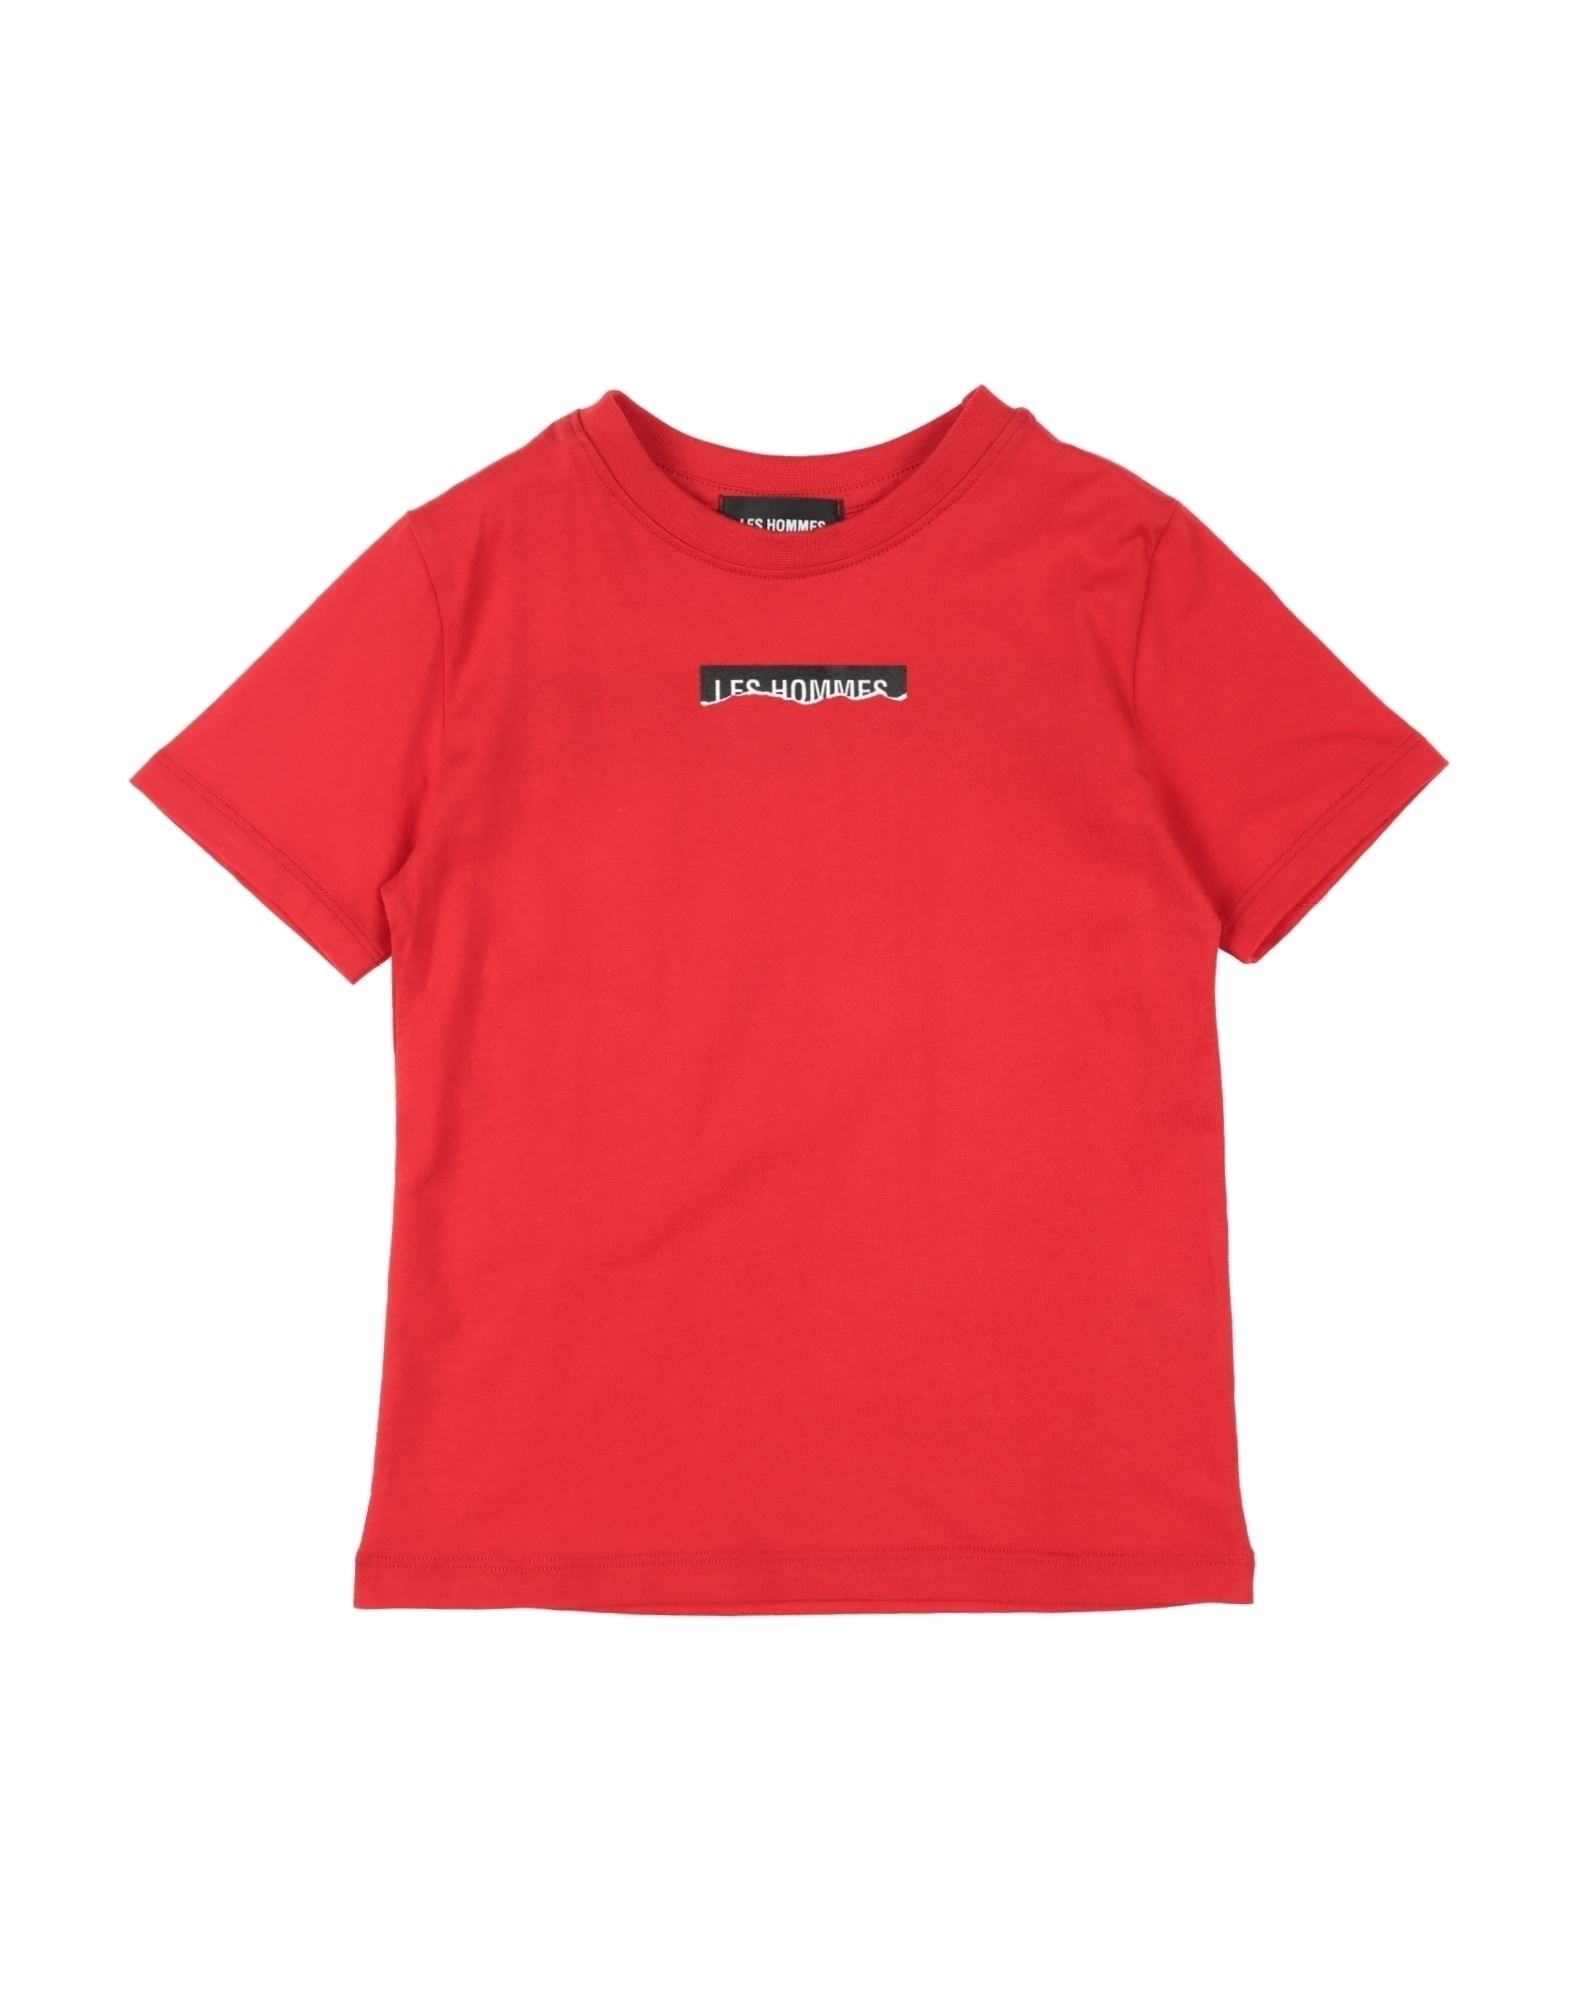 Les Hommes Kids'  T-shirts In Red